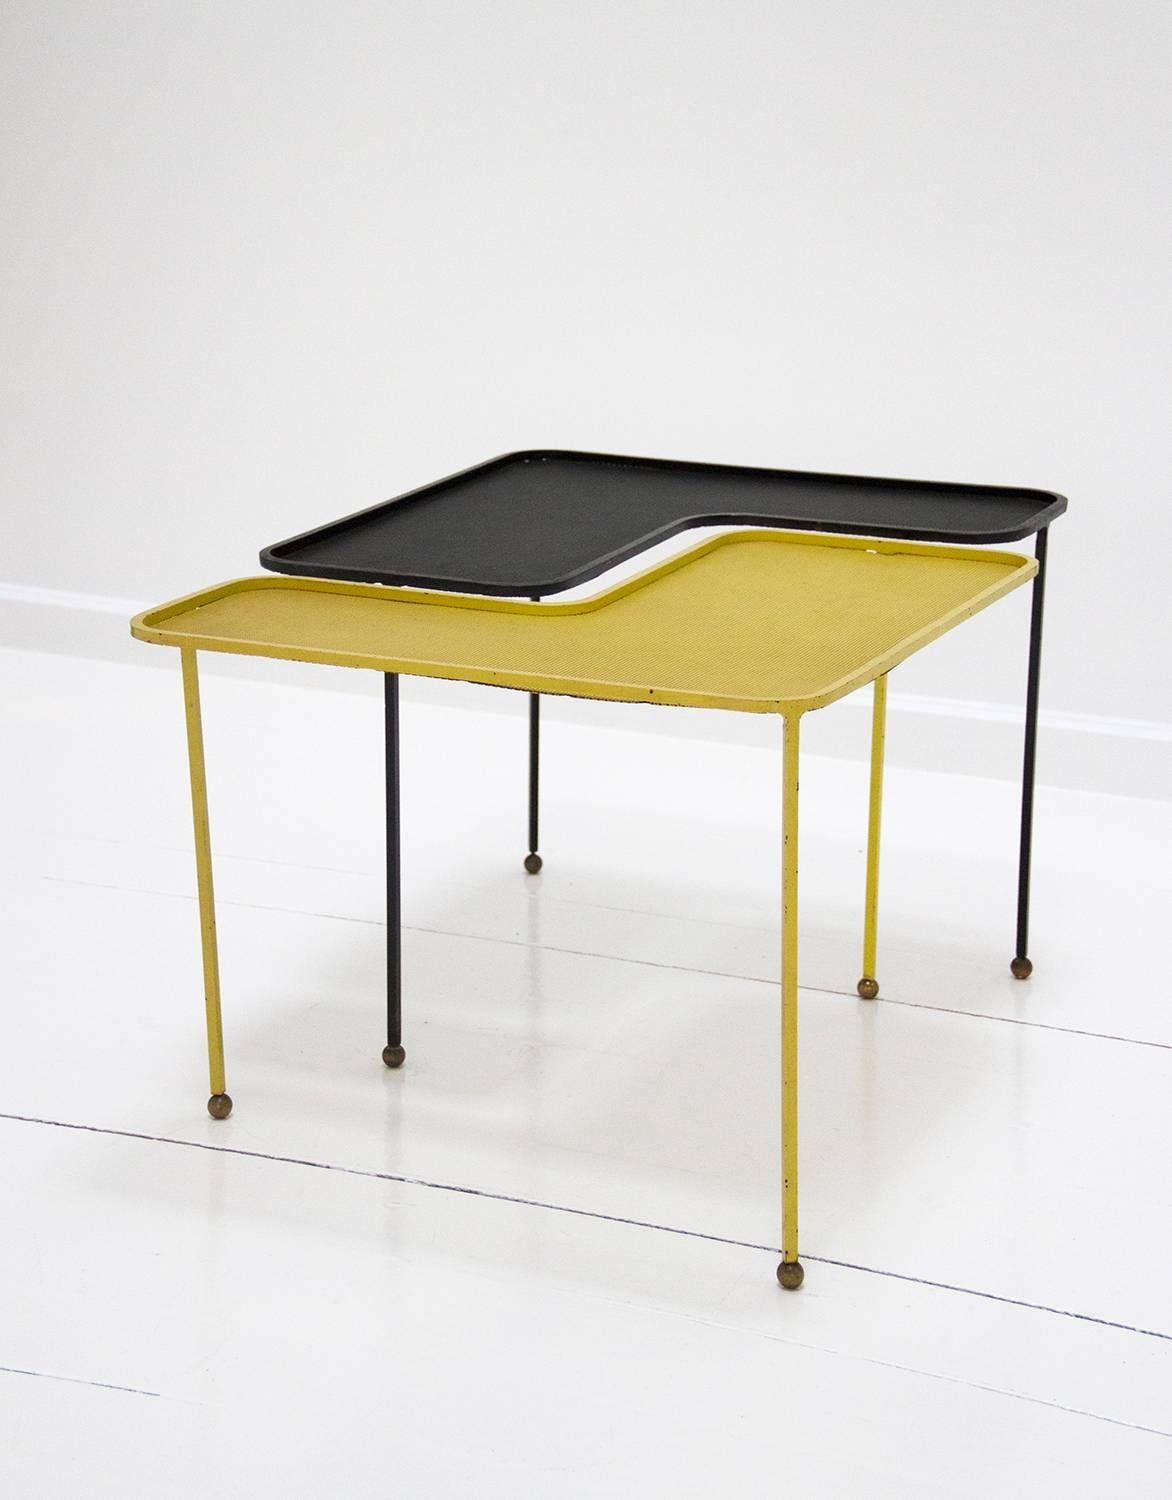 Pair of Domino coffee tables by Mathieu Matégot in brass, black and yellow lacquered perforated metal. In good condition, preserving the original patina.
Mathieu Matégot is a well-recognized designer from the 20th century. What makes him that